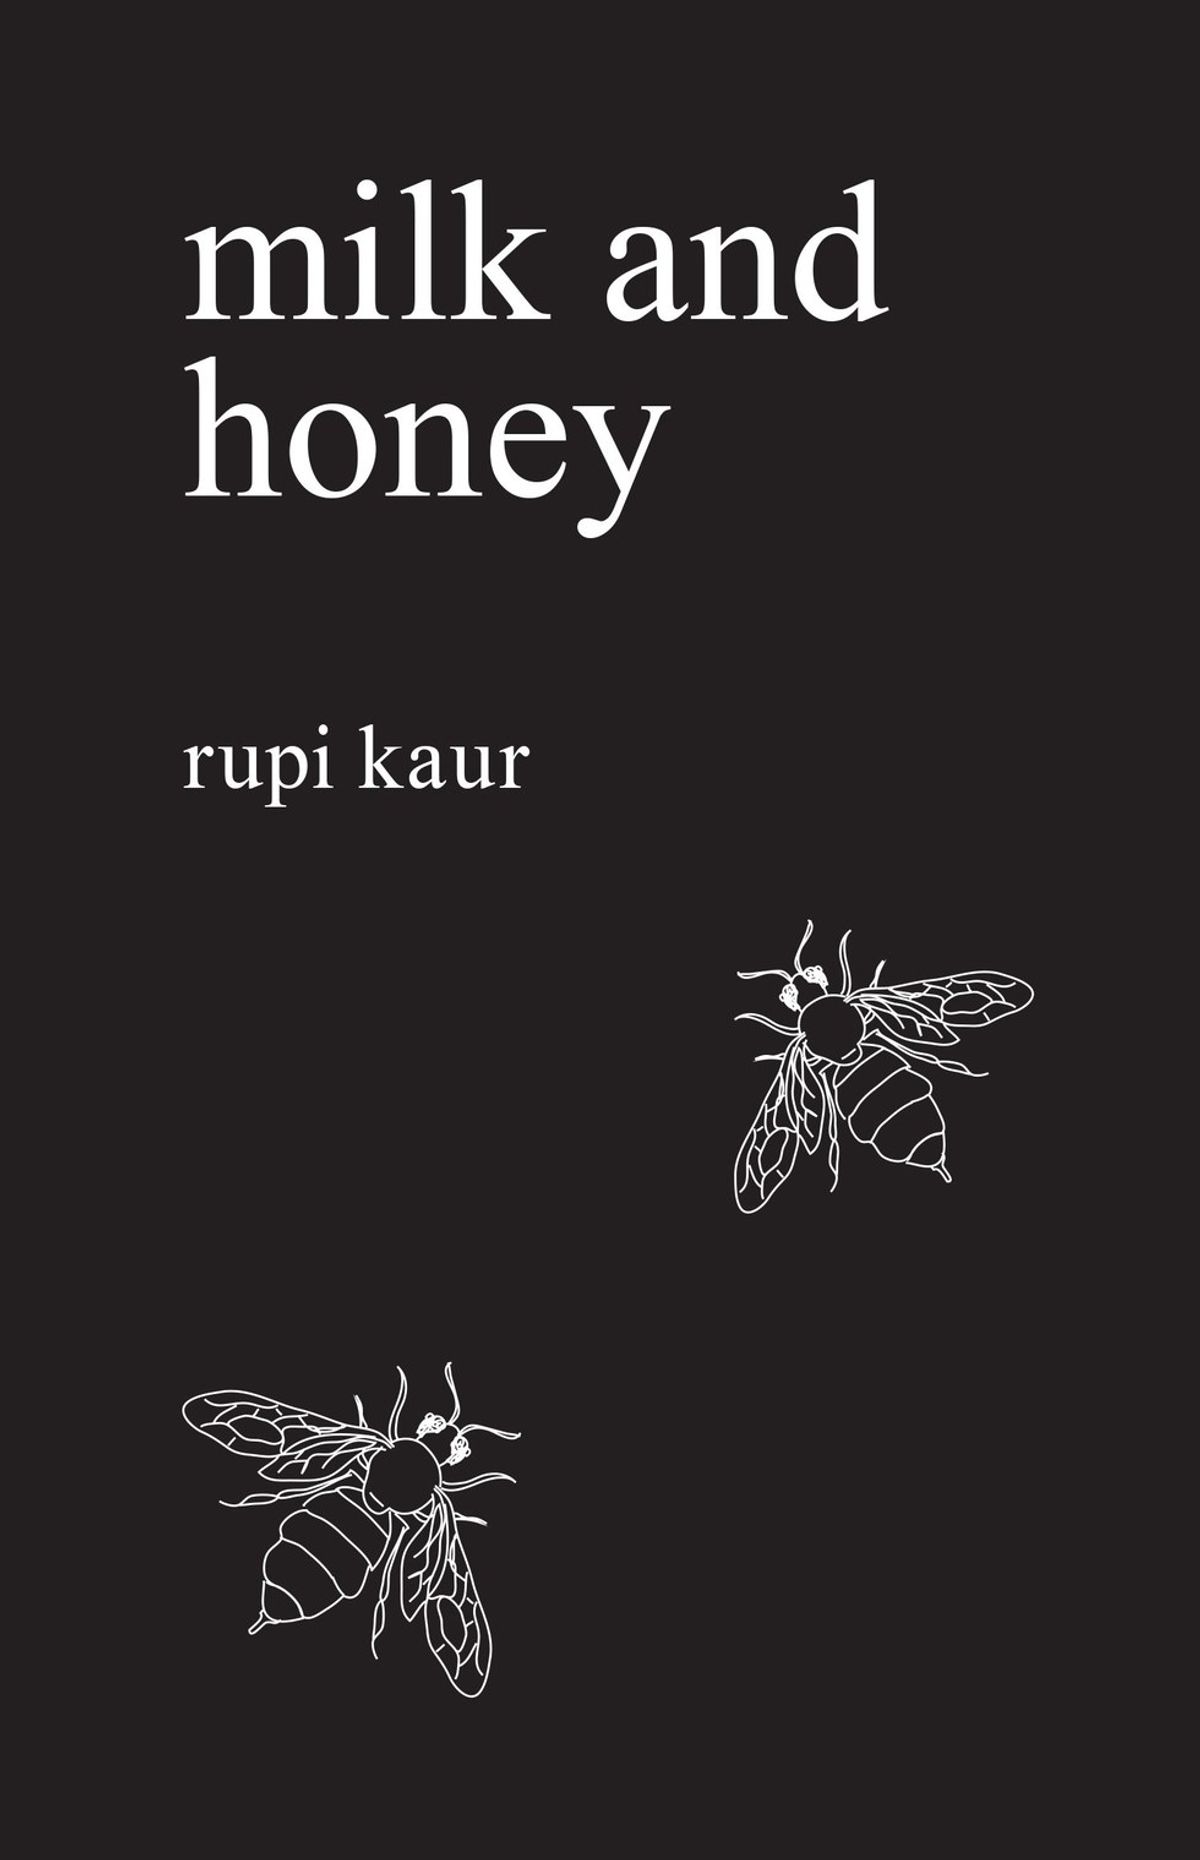 The 10 Best Lines In 'Milk And Honey' By Rupi Kaur